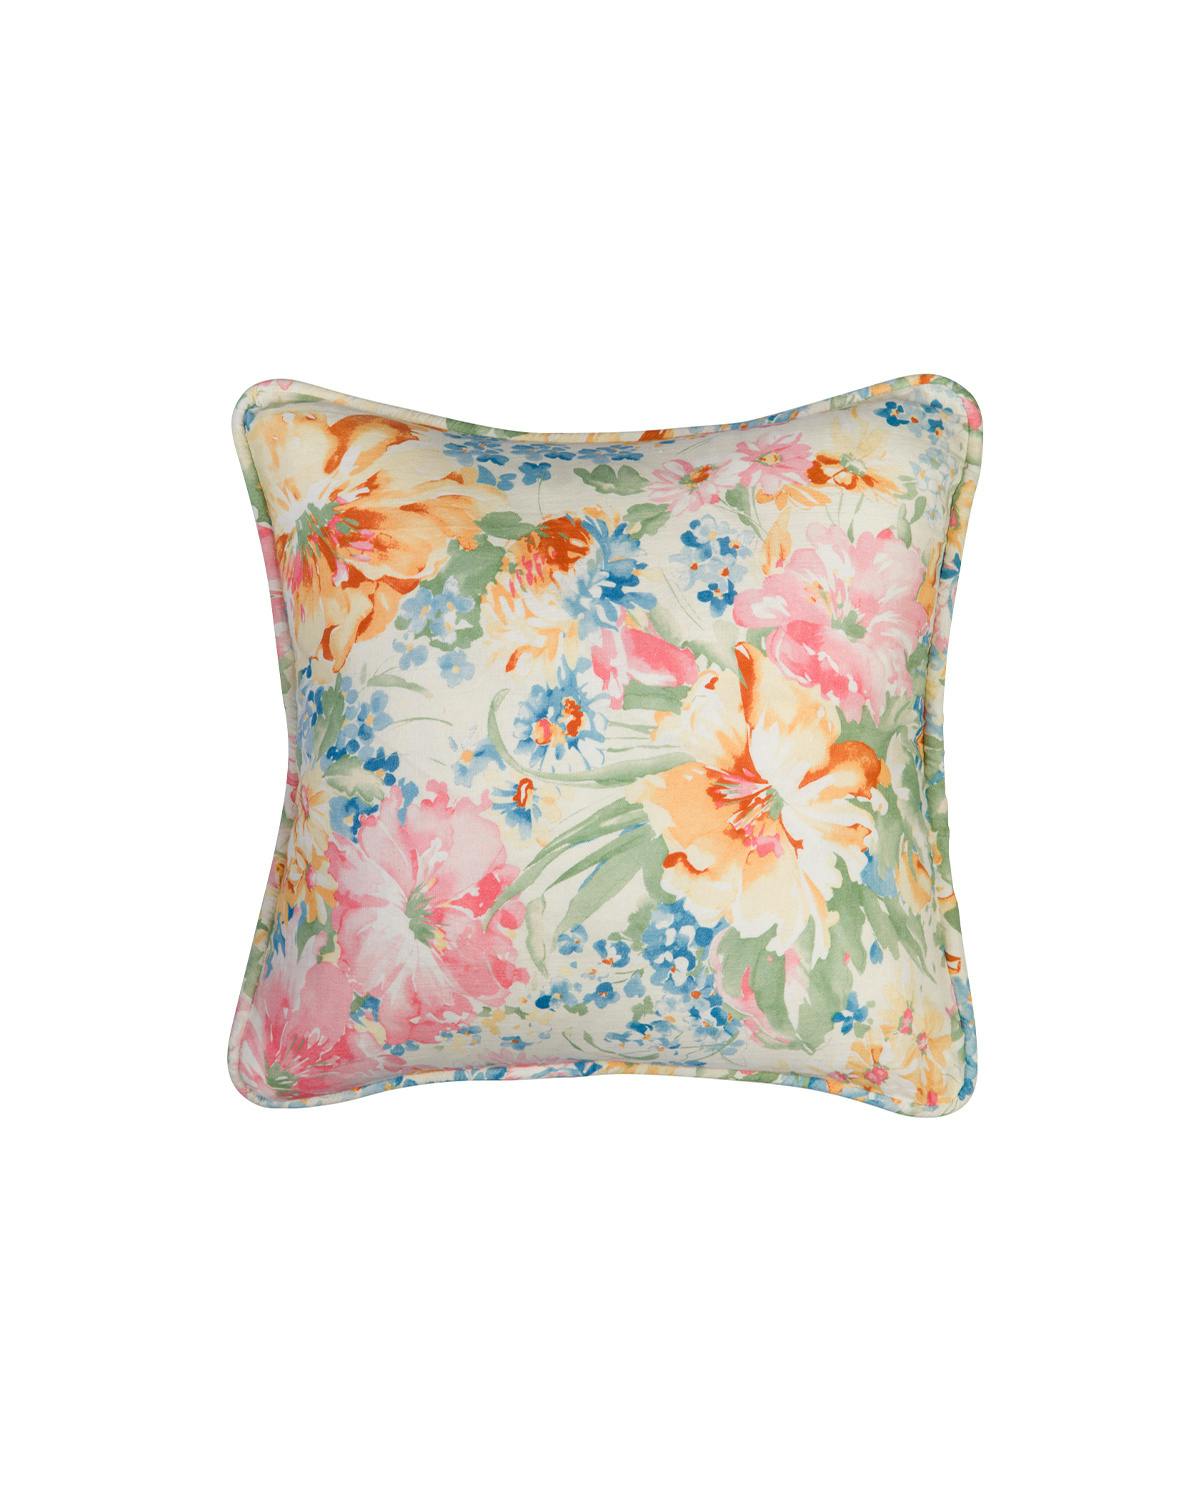 Cushion Cover Linen 50x50 cm, Pink floral. Image #2